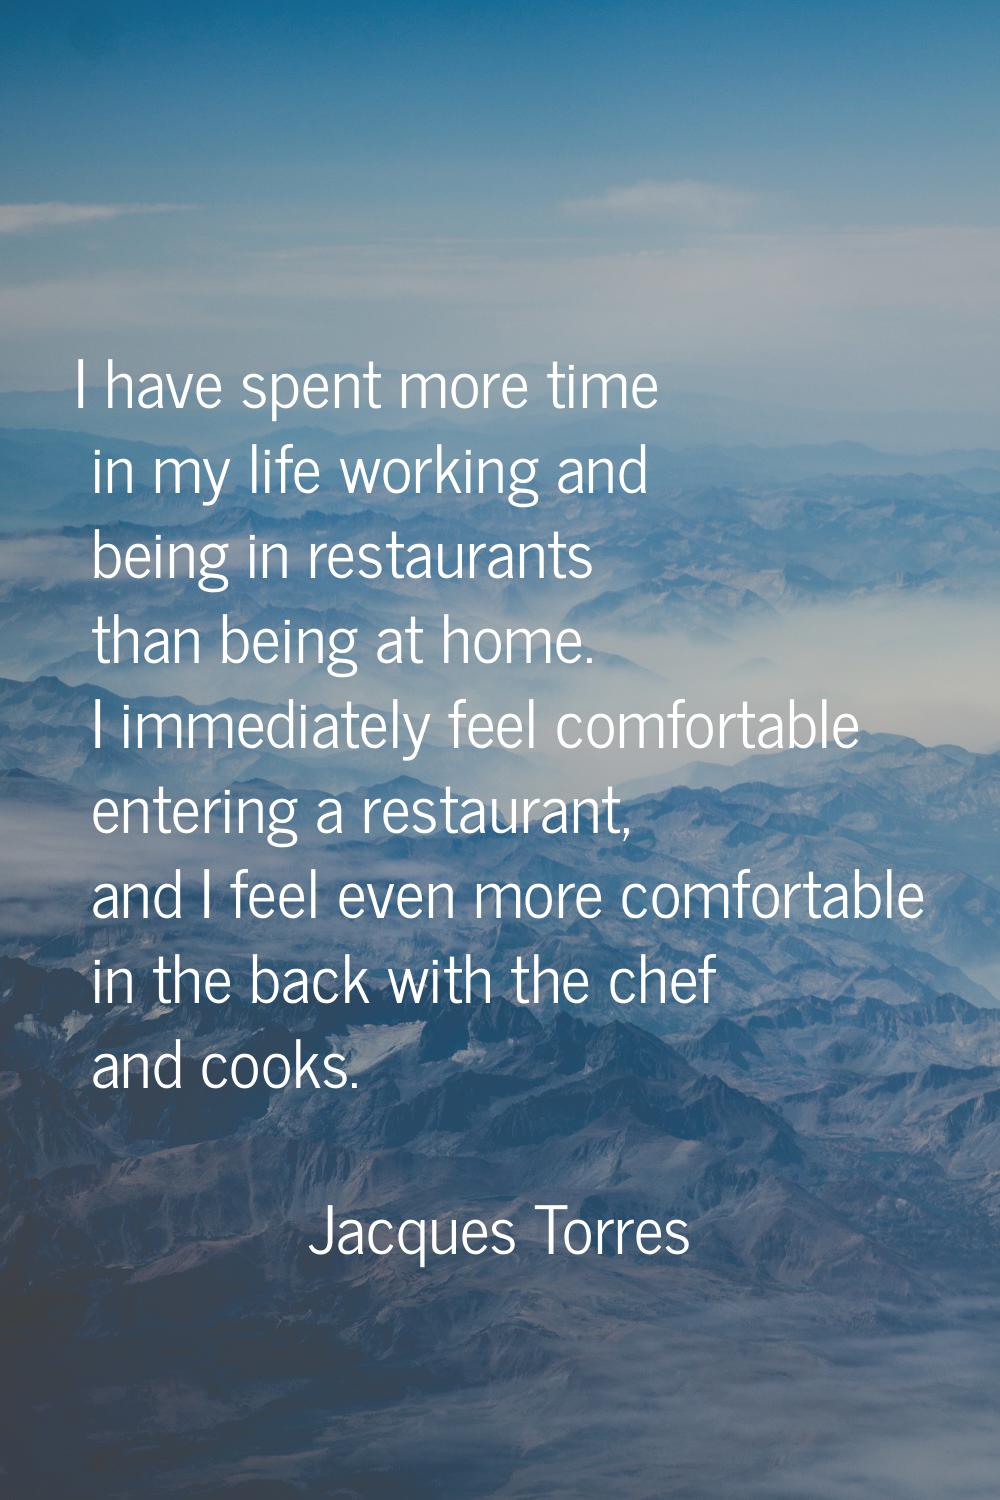 I have spent more time in my life working and being in restaurants than being at home. I immediatel